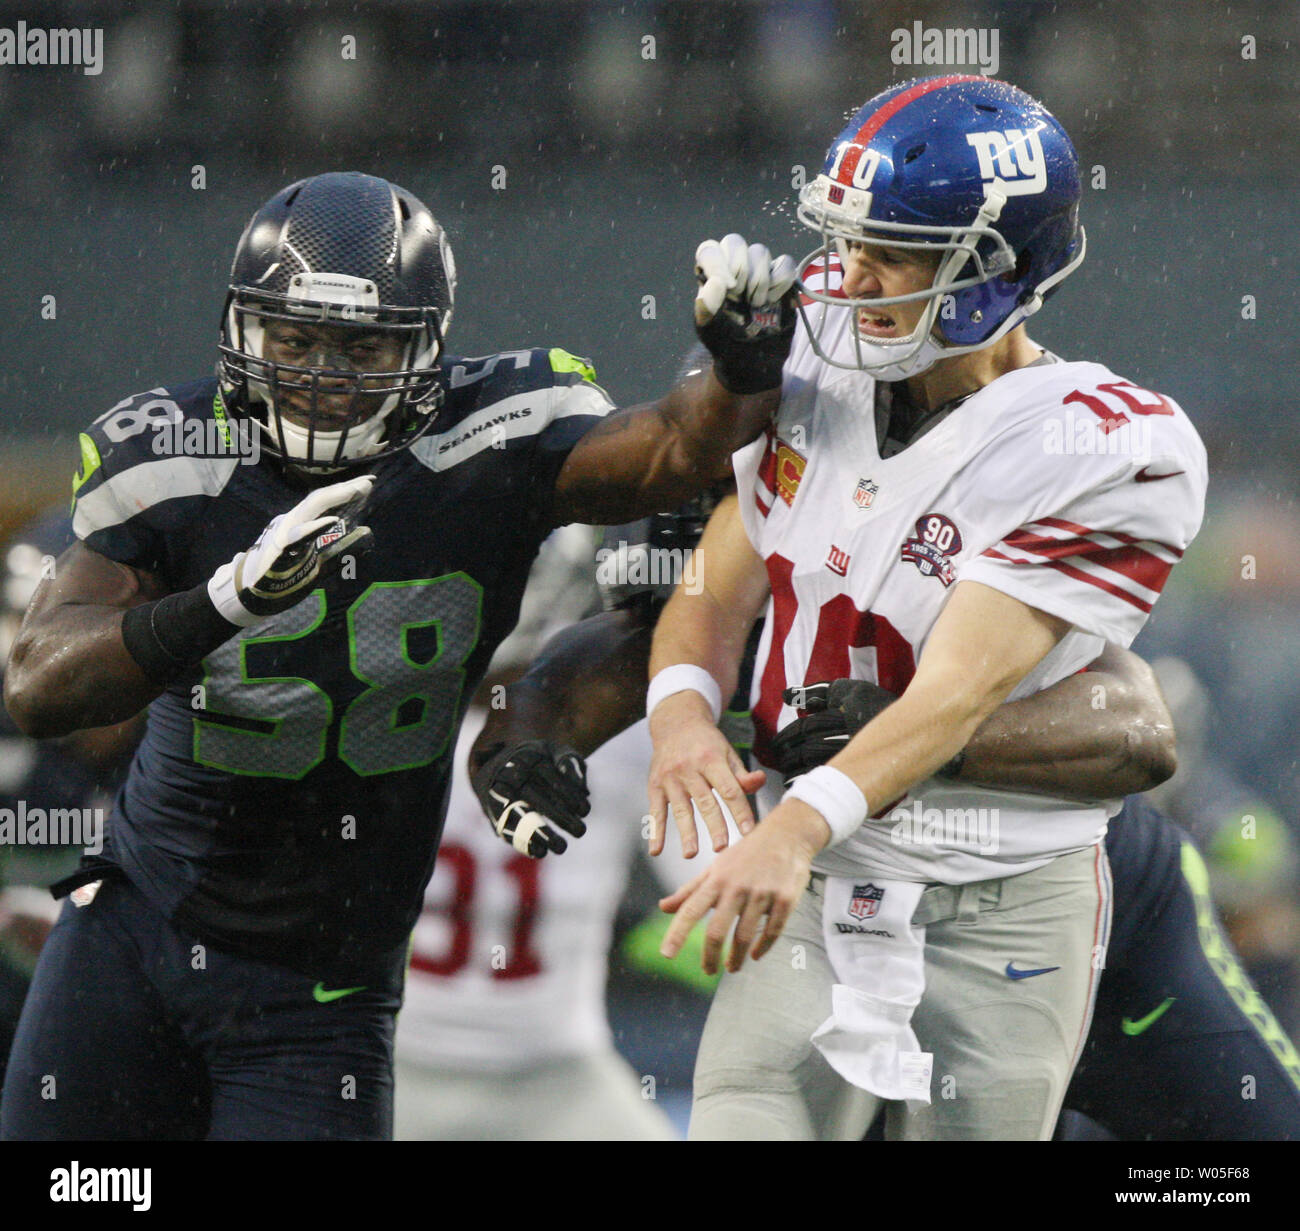 New York Giants quarterback Eli Manning (10) takes a hit from Seattle Seahawks Kevin Pierre-Louis (58) and K.J. Wright  (50) at CenturyLink Field in Seattle, Washington on November 9, 2014. The Seahawks  beat the Giants 38-17.     UPI/Jim Bryant Stock Photo